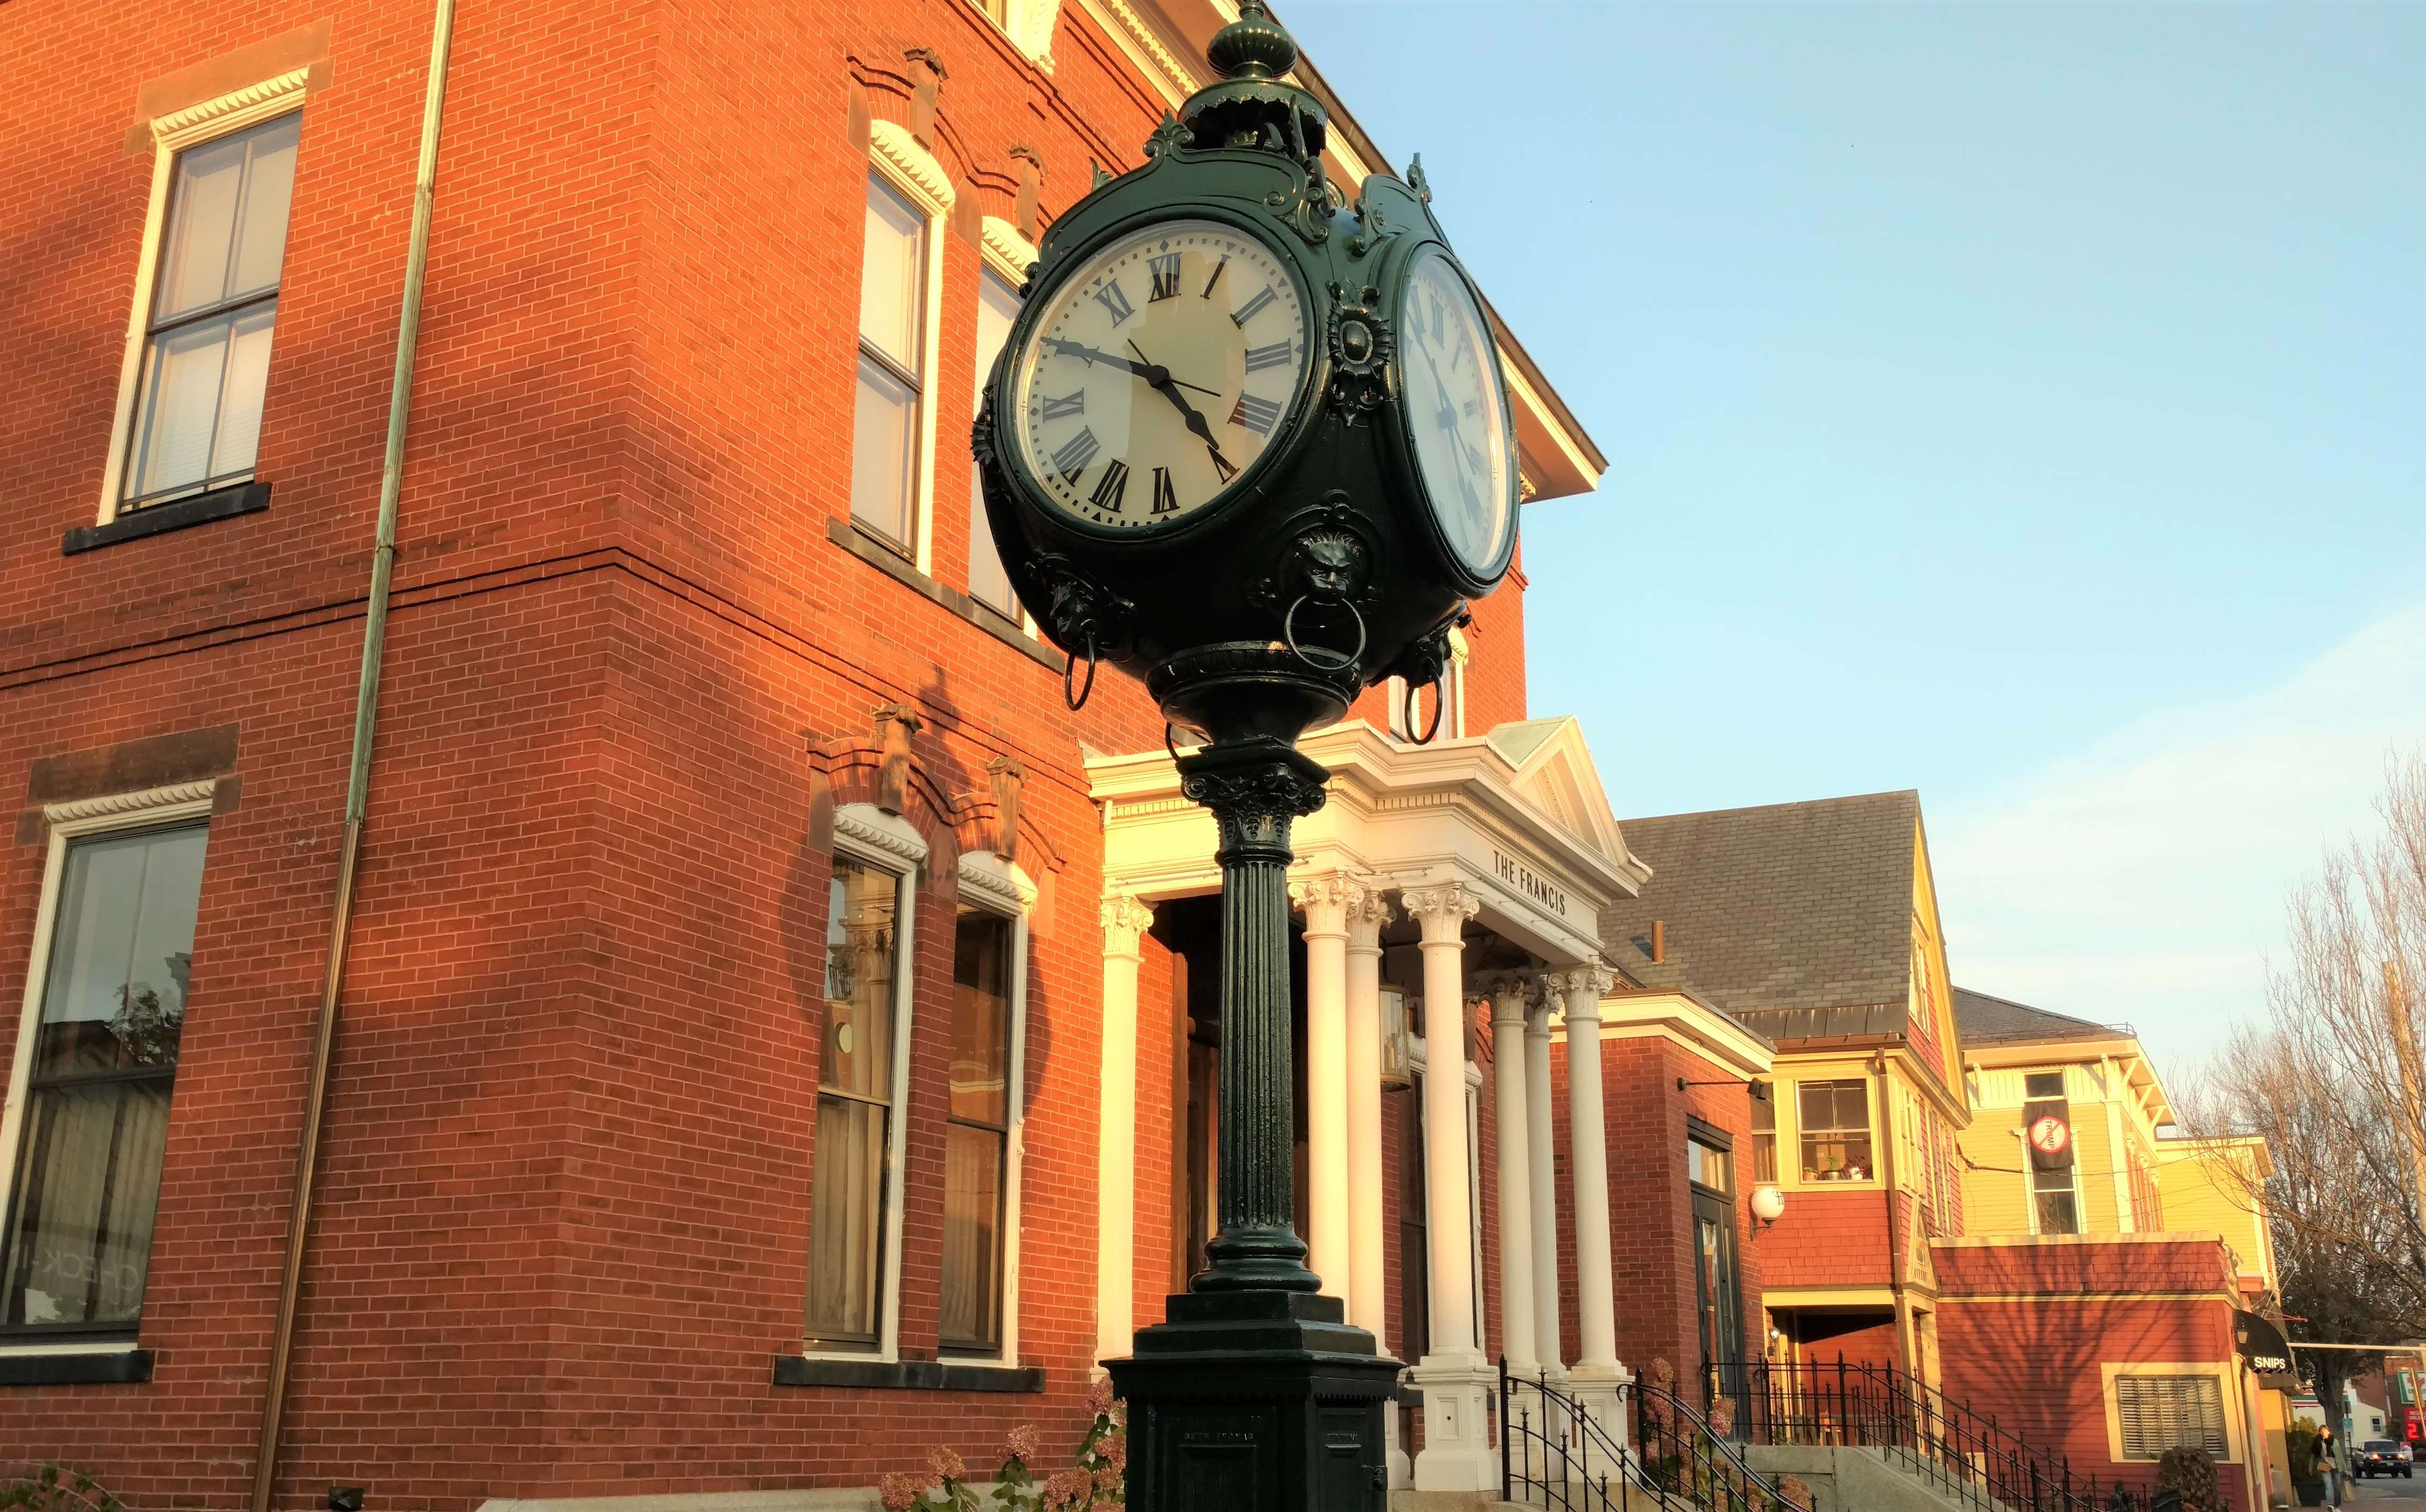 historic outdoor clock on street, in front of red brick victorian house